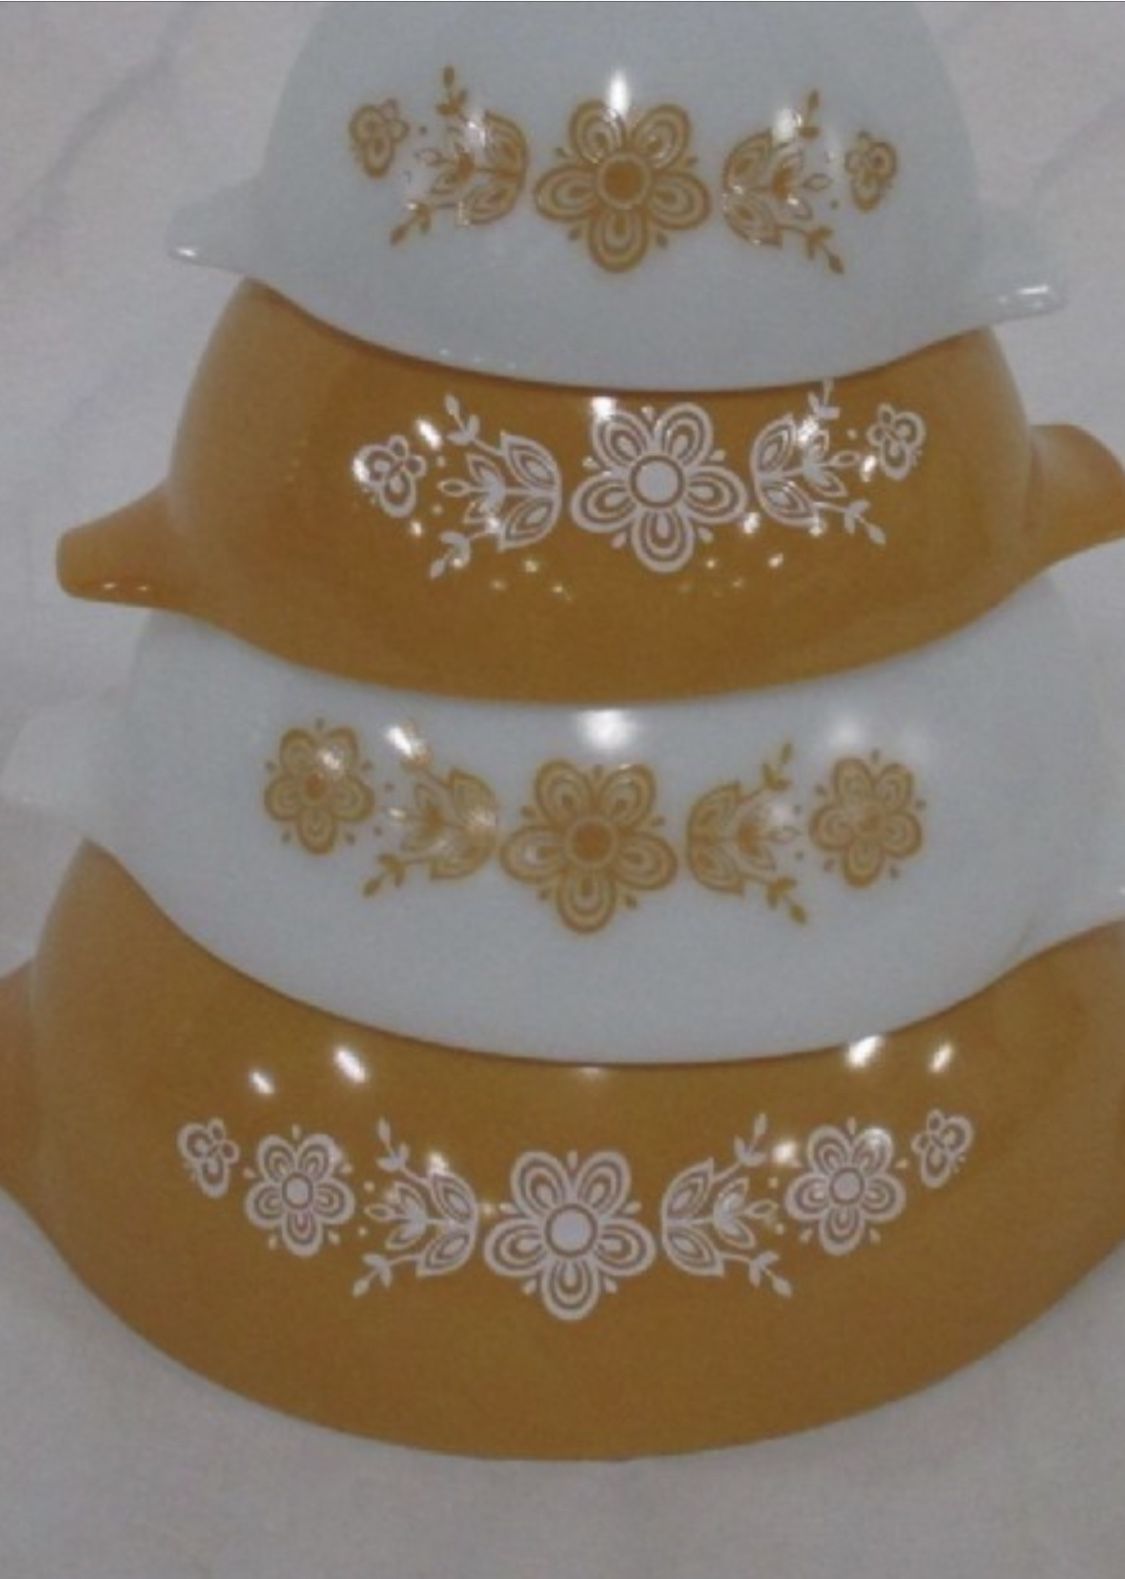 1970’s Vintage Pyrex Cinderella Butterfly Gold Nesting mixing bowl set